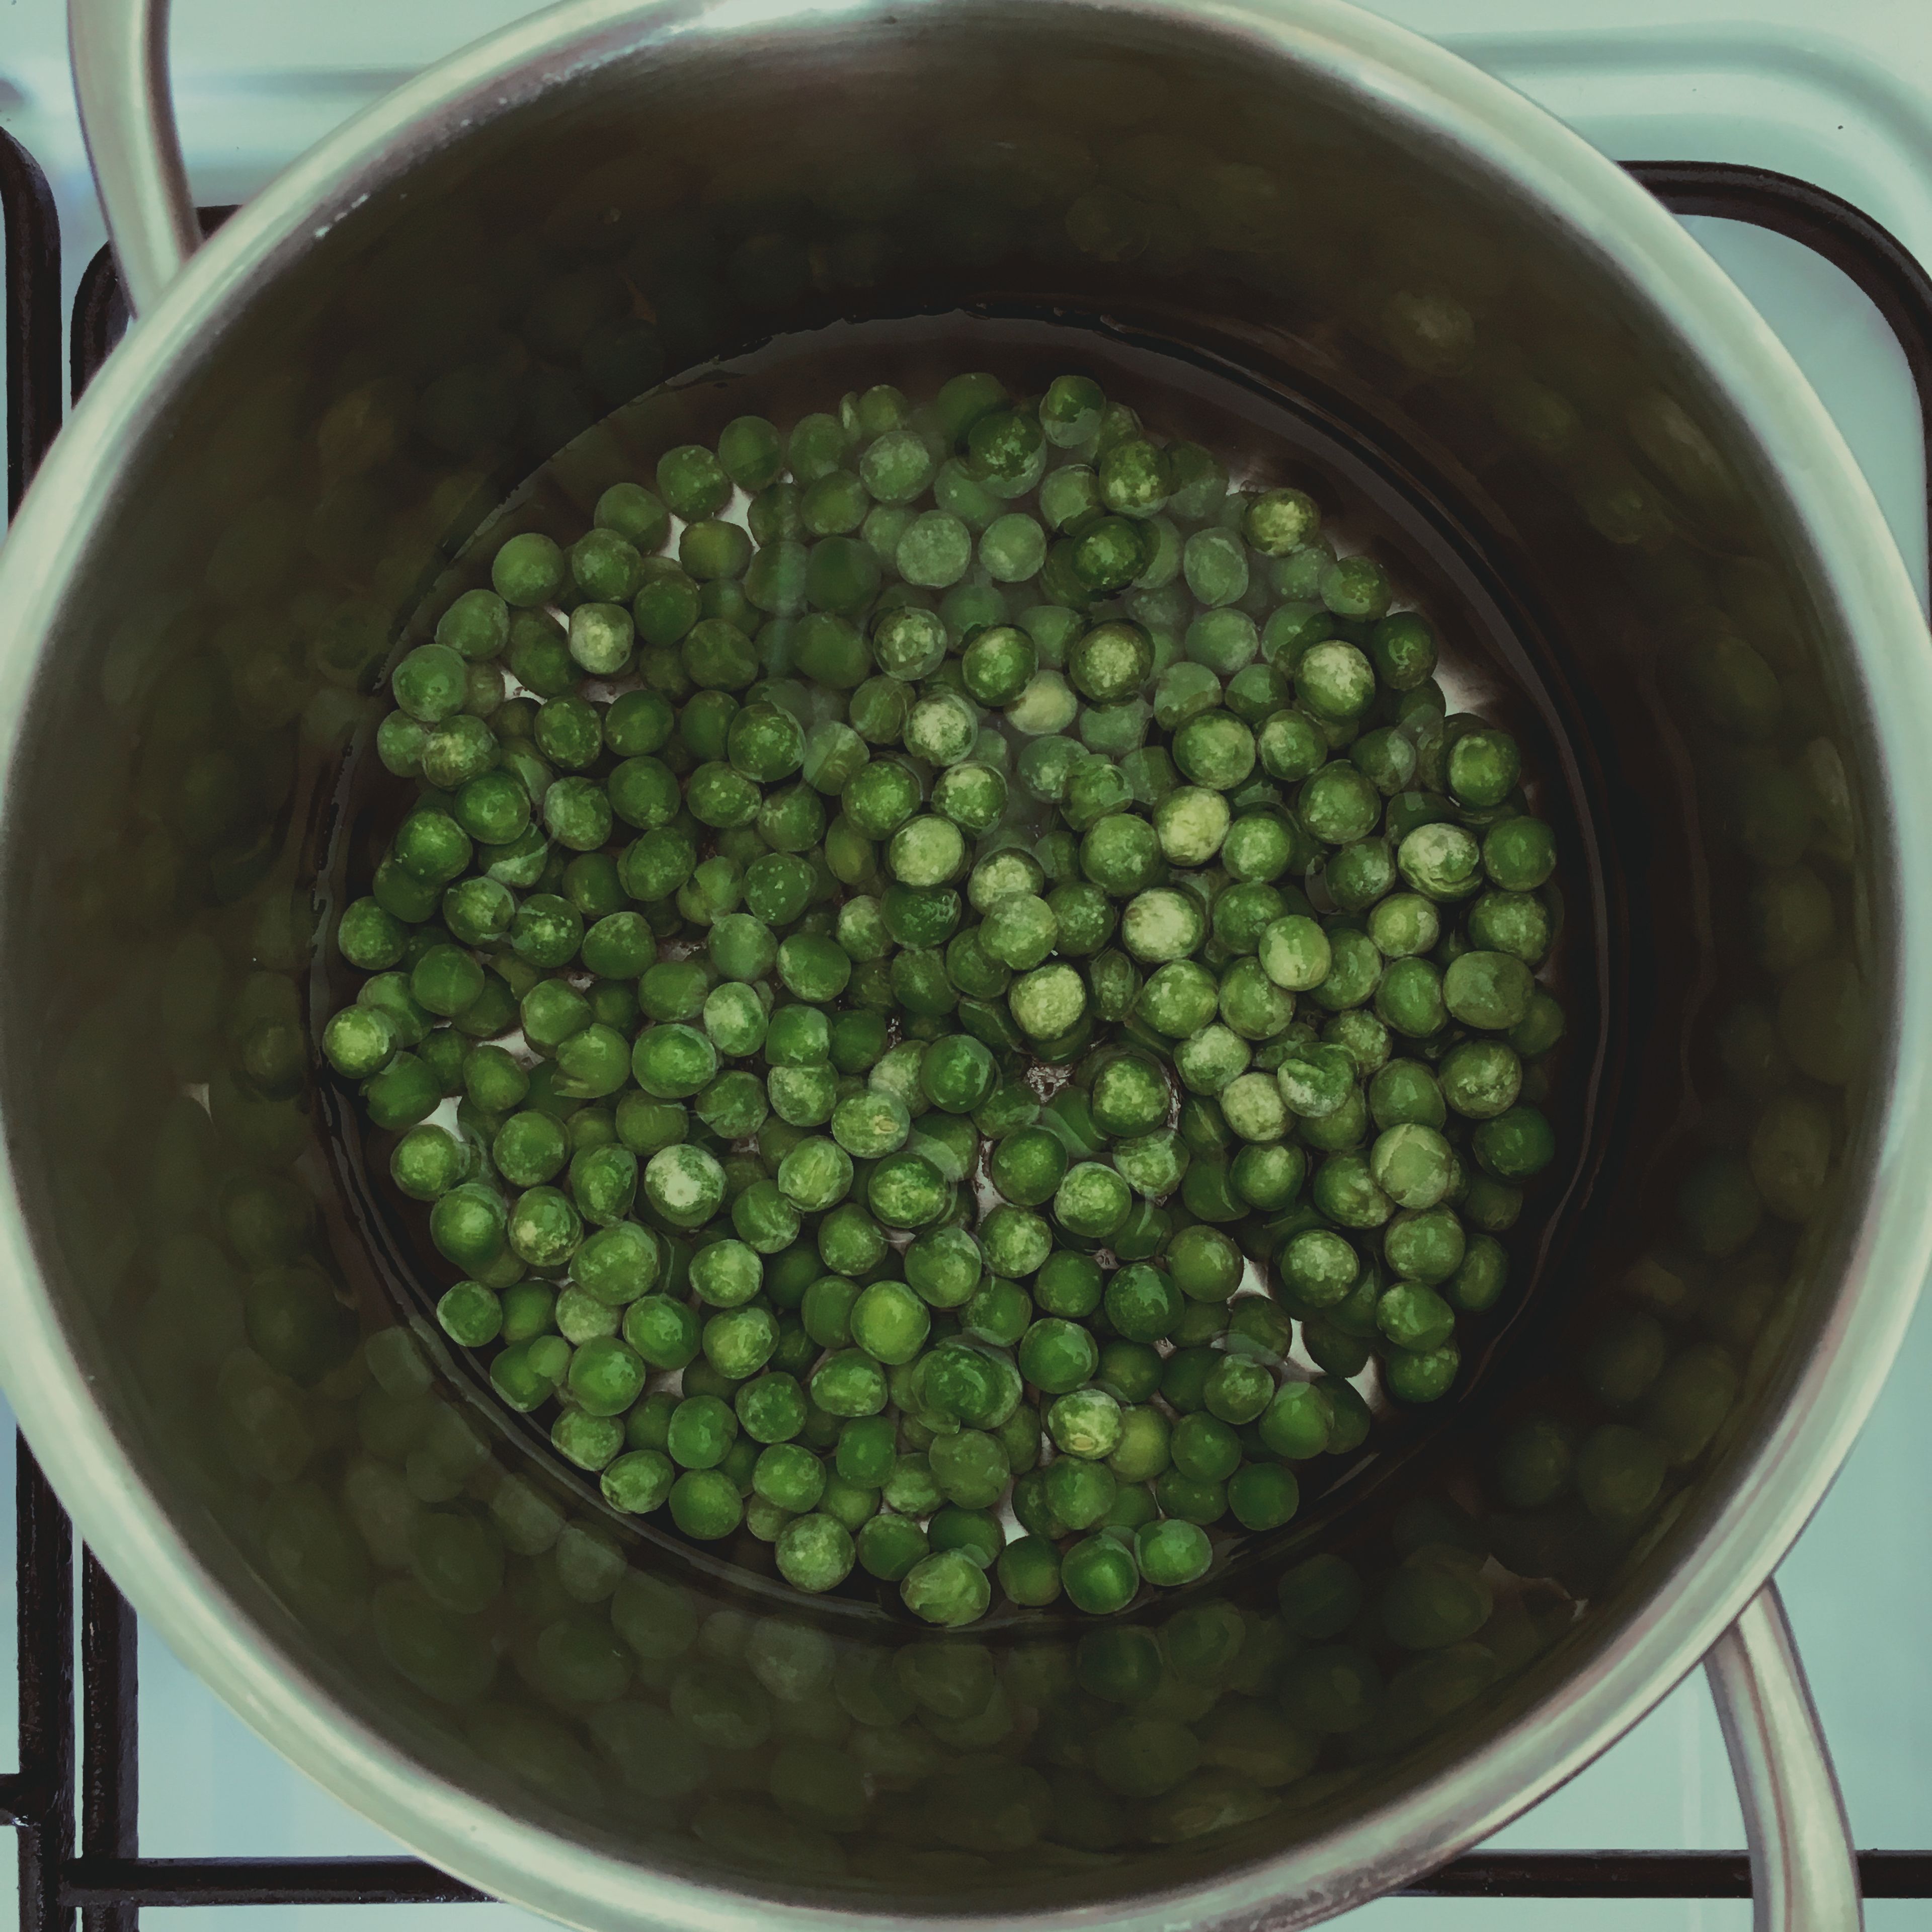 Add frozen peas to pot of boiling water and cook for approx. 4 - 6 min. Drain and rinse under cold water to stop the cooking process. Add to a bowl with avocado and mash until smooth.